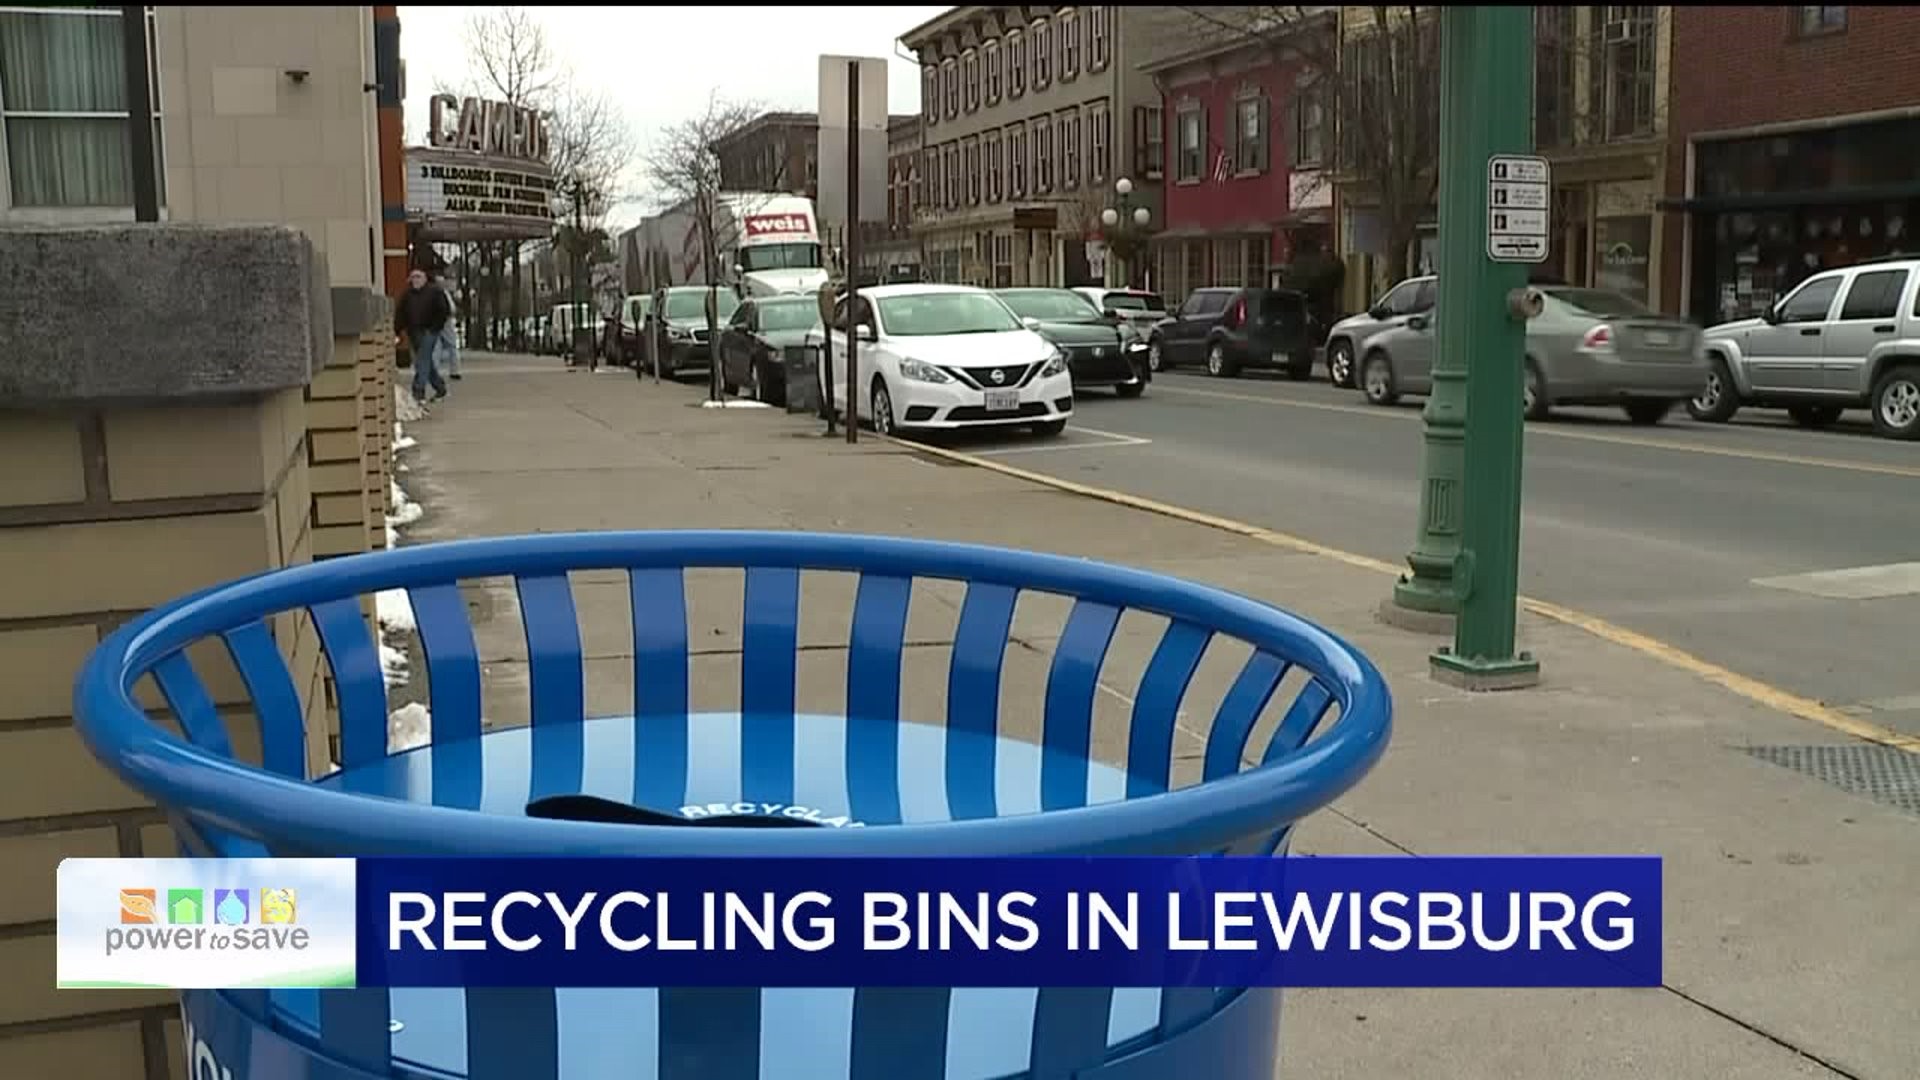 Power to Save: Recycling Bins in Lewisburg